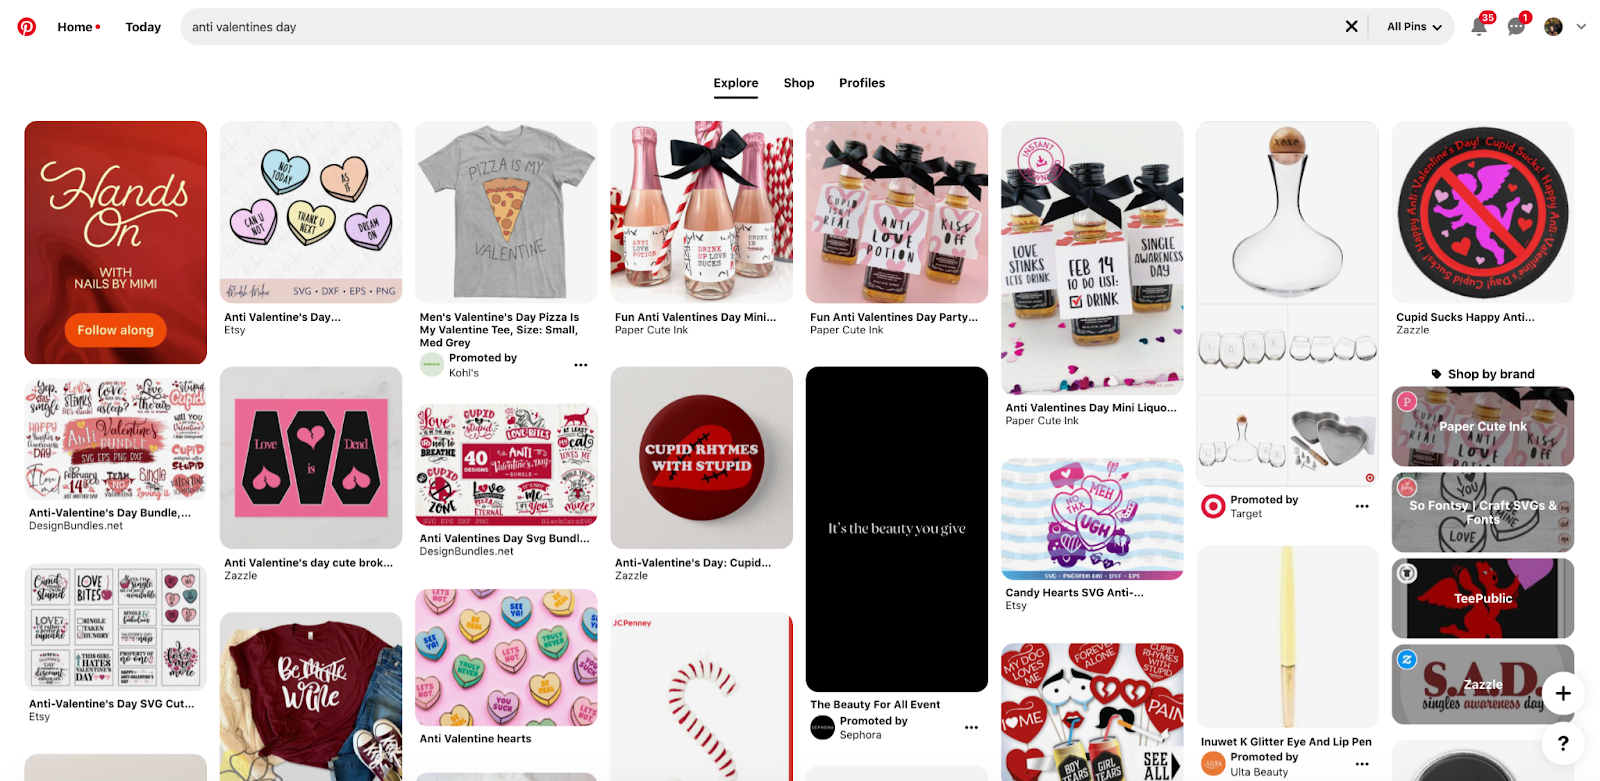 Screenshot of Pinterest search for "ant-Valentine's day" including many graphics and anti-cupid imagery